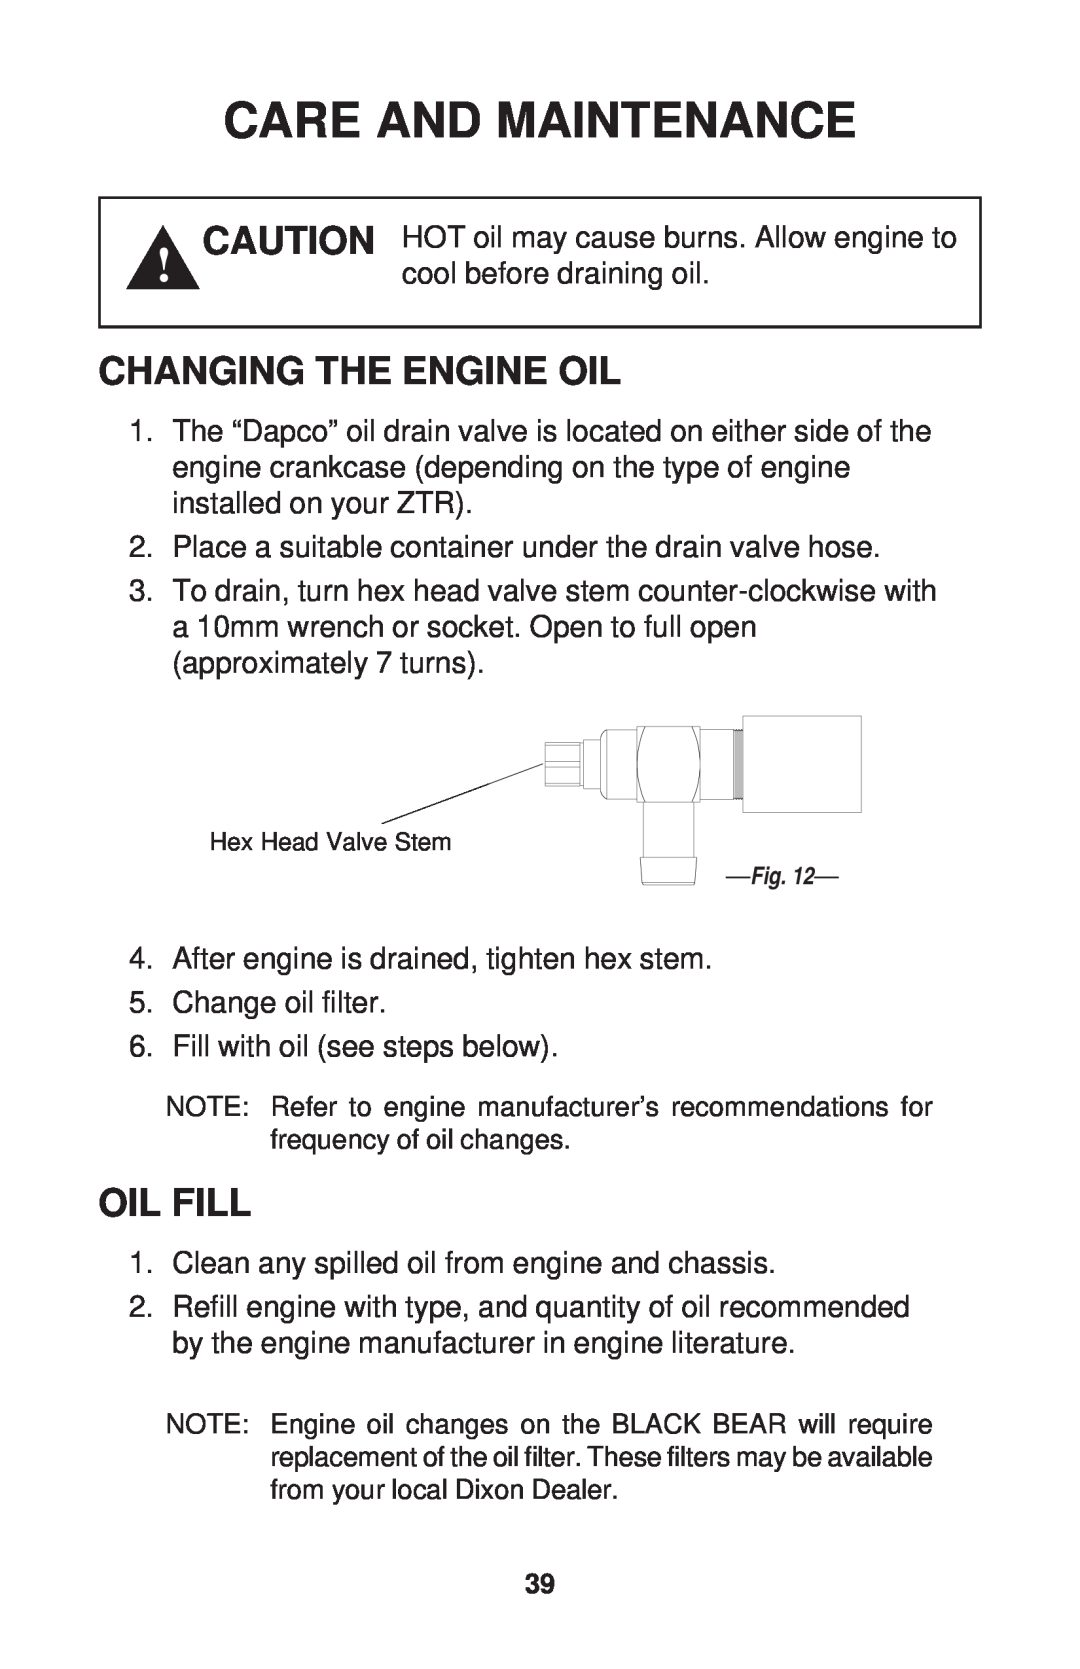 Dixon ZTR 34, ZTR 44, ZTR 34 manual Changing The Engine Oil, Oil Fill, Care And Maintenance 